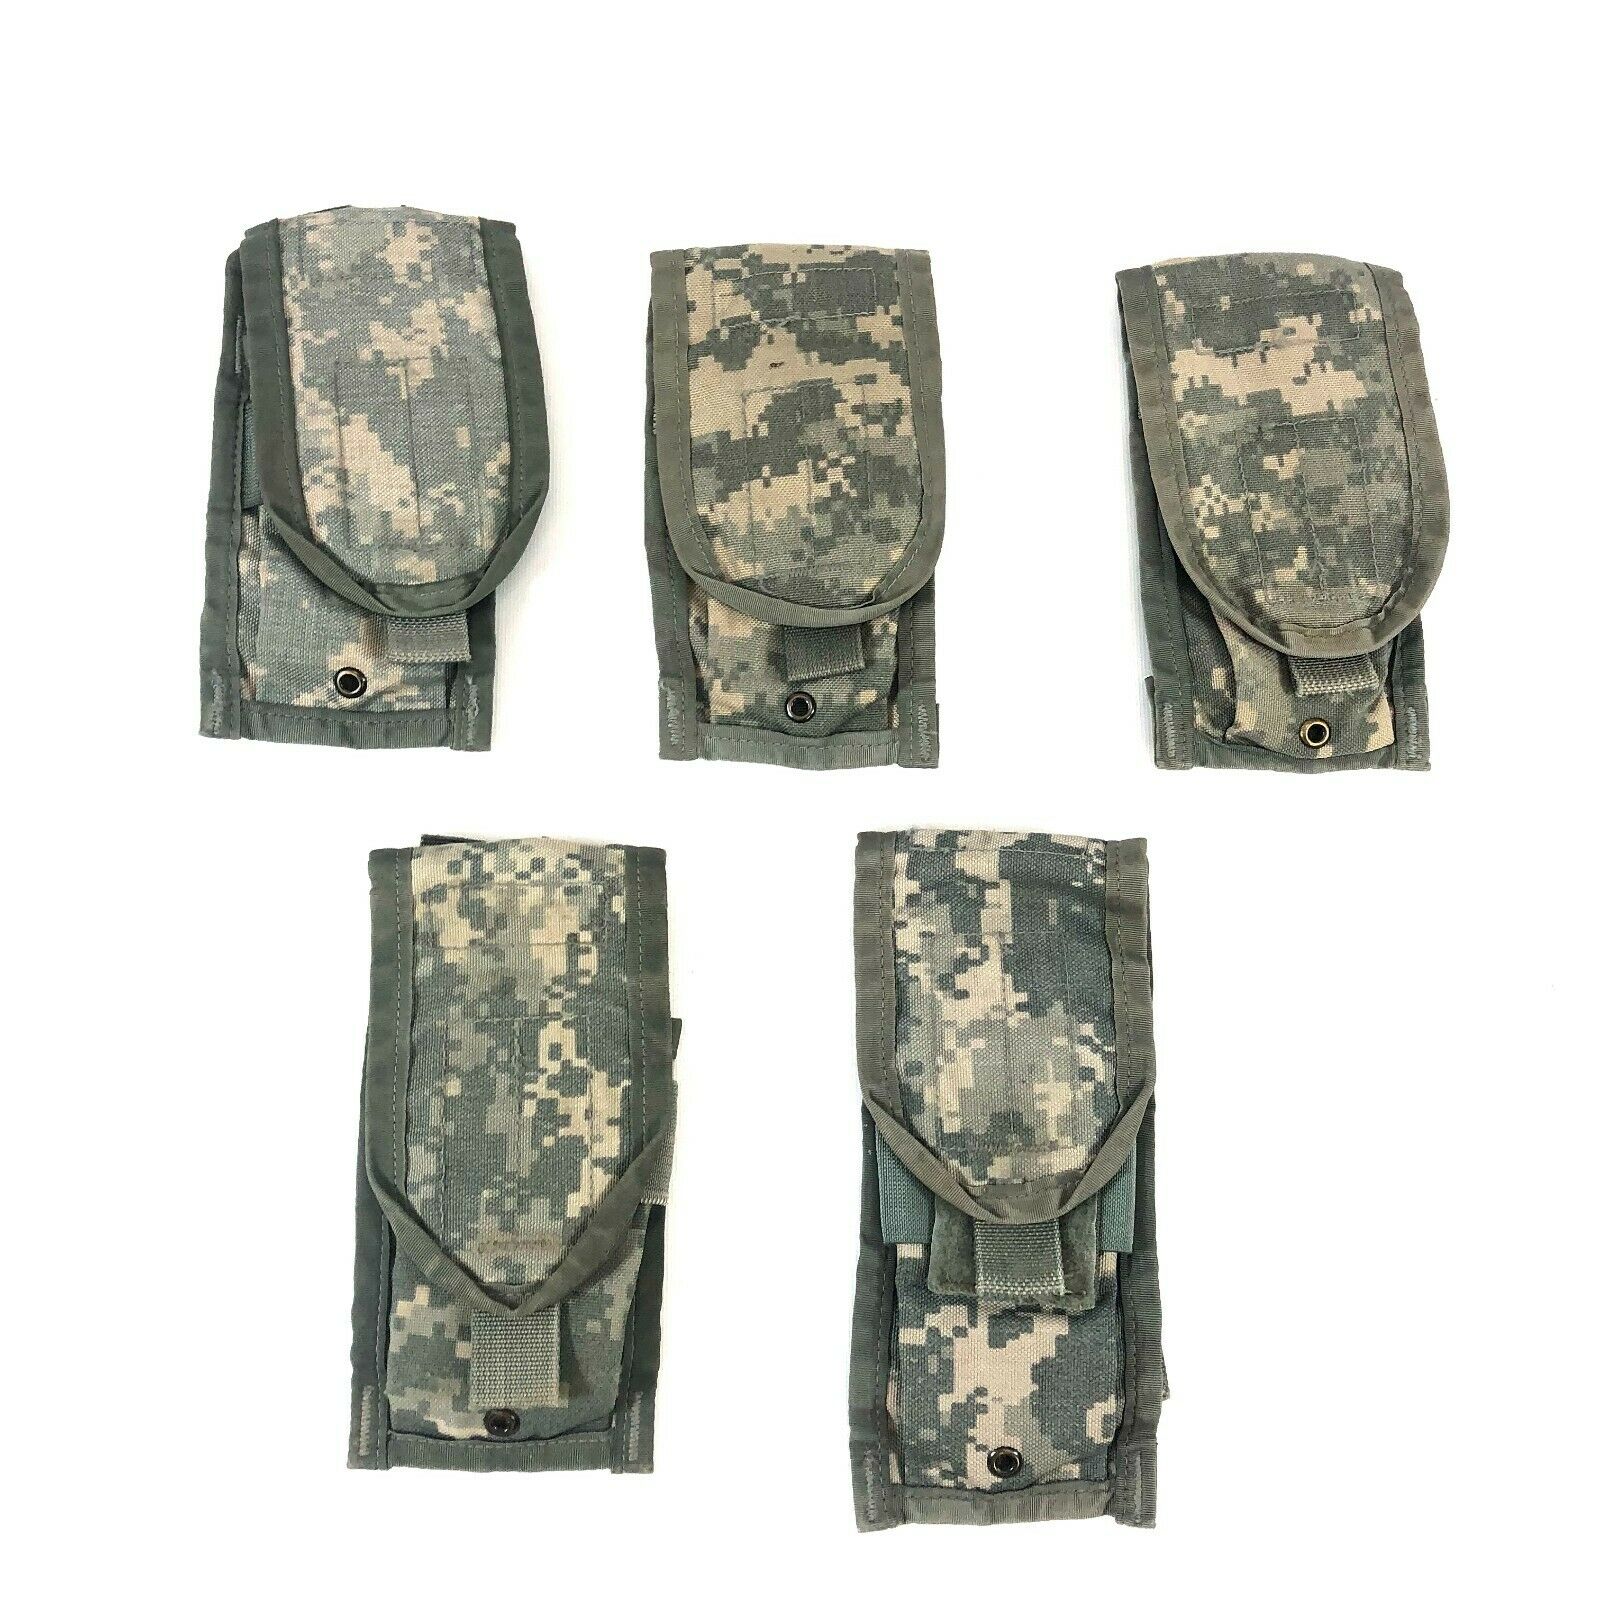 5 Acu Double Mag Pouch Army Molle Ii Camo Usgi Military Pouches, 2 Magazine